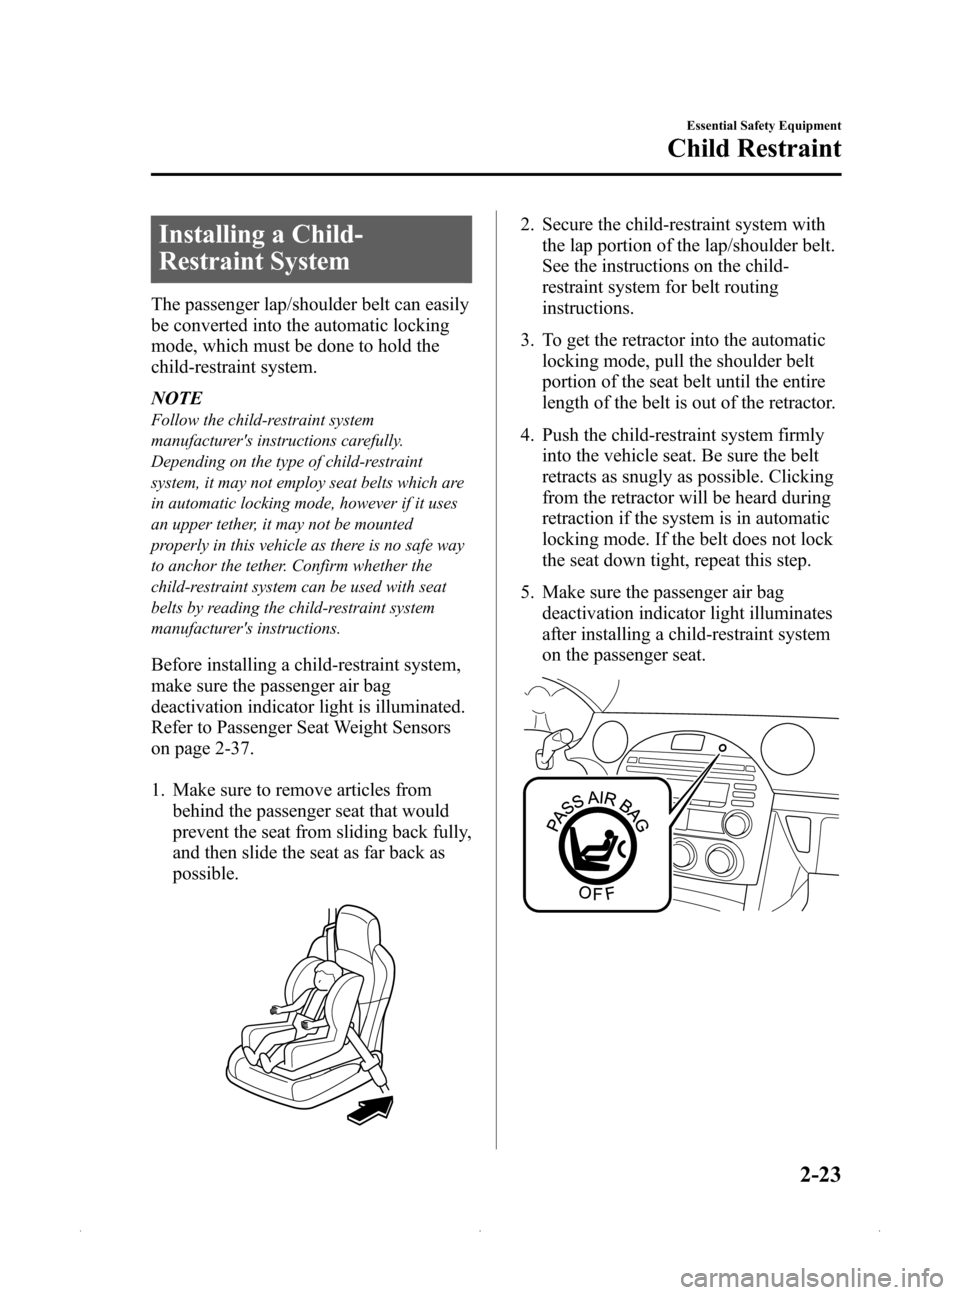 MAZDA MODEL MX-5 PRHT 2015   (in English) Owners Guide Black plate (35,1)
Installing a Child-
Restraint System
The passenger lap/shoulder belt can easily
be converted into the automatic locking
mode, which must be done to hold the
child-restraint system.
